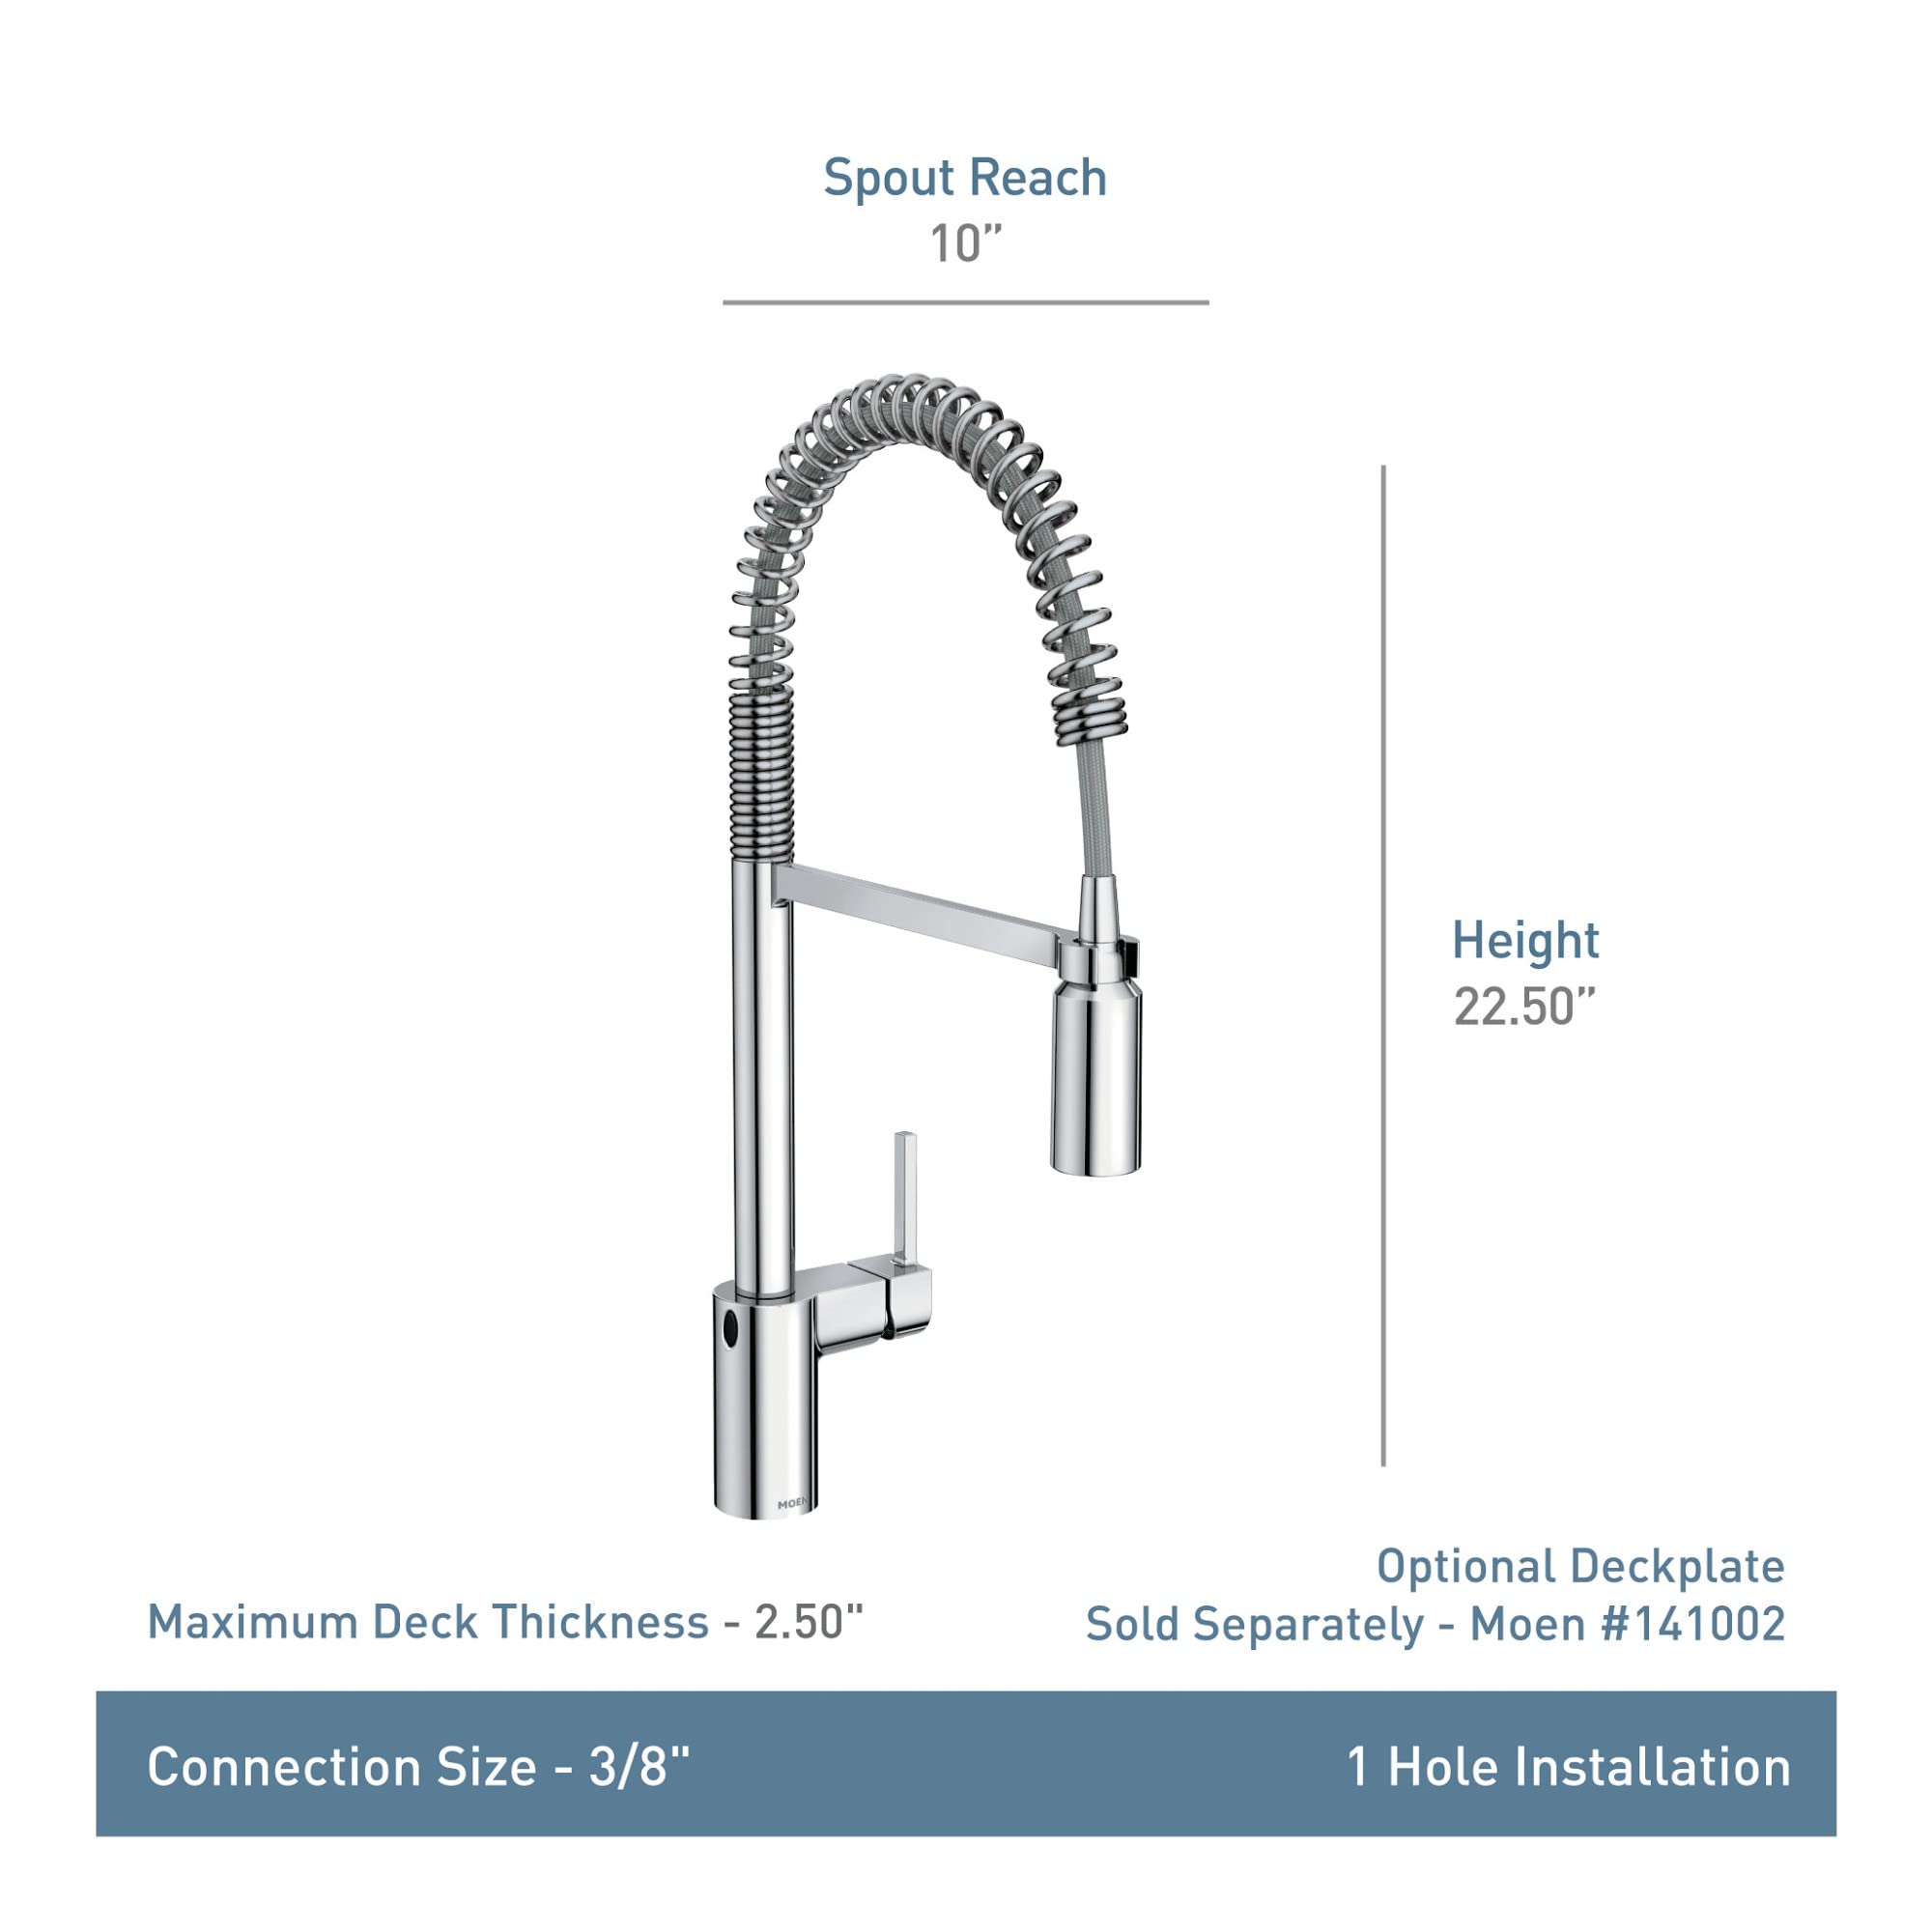 Moen Align Matte Black Motionsense Wave Sensor Touchless One-Handle High Arc Spring Pre-Rinse Pulldown Kitchen Faucet with Sprayer, Kitchen Sink Faucet for Bar, Farmhouse, Commercial, 5923EWBL